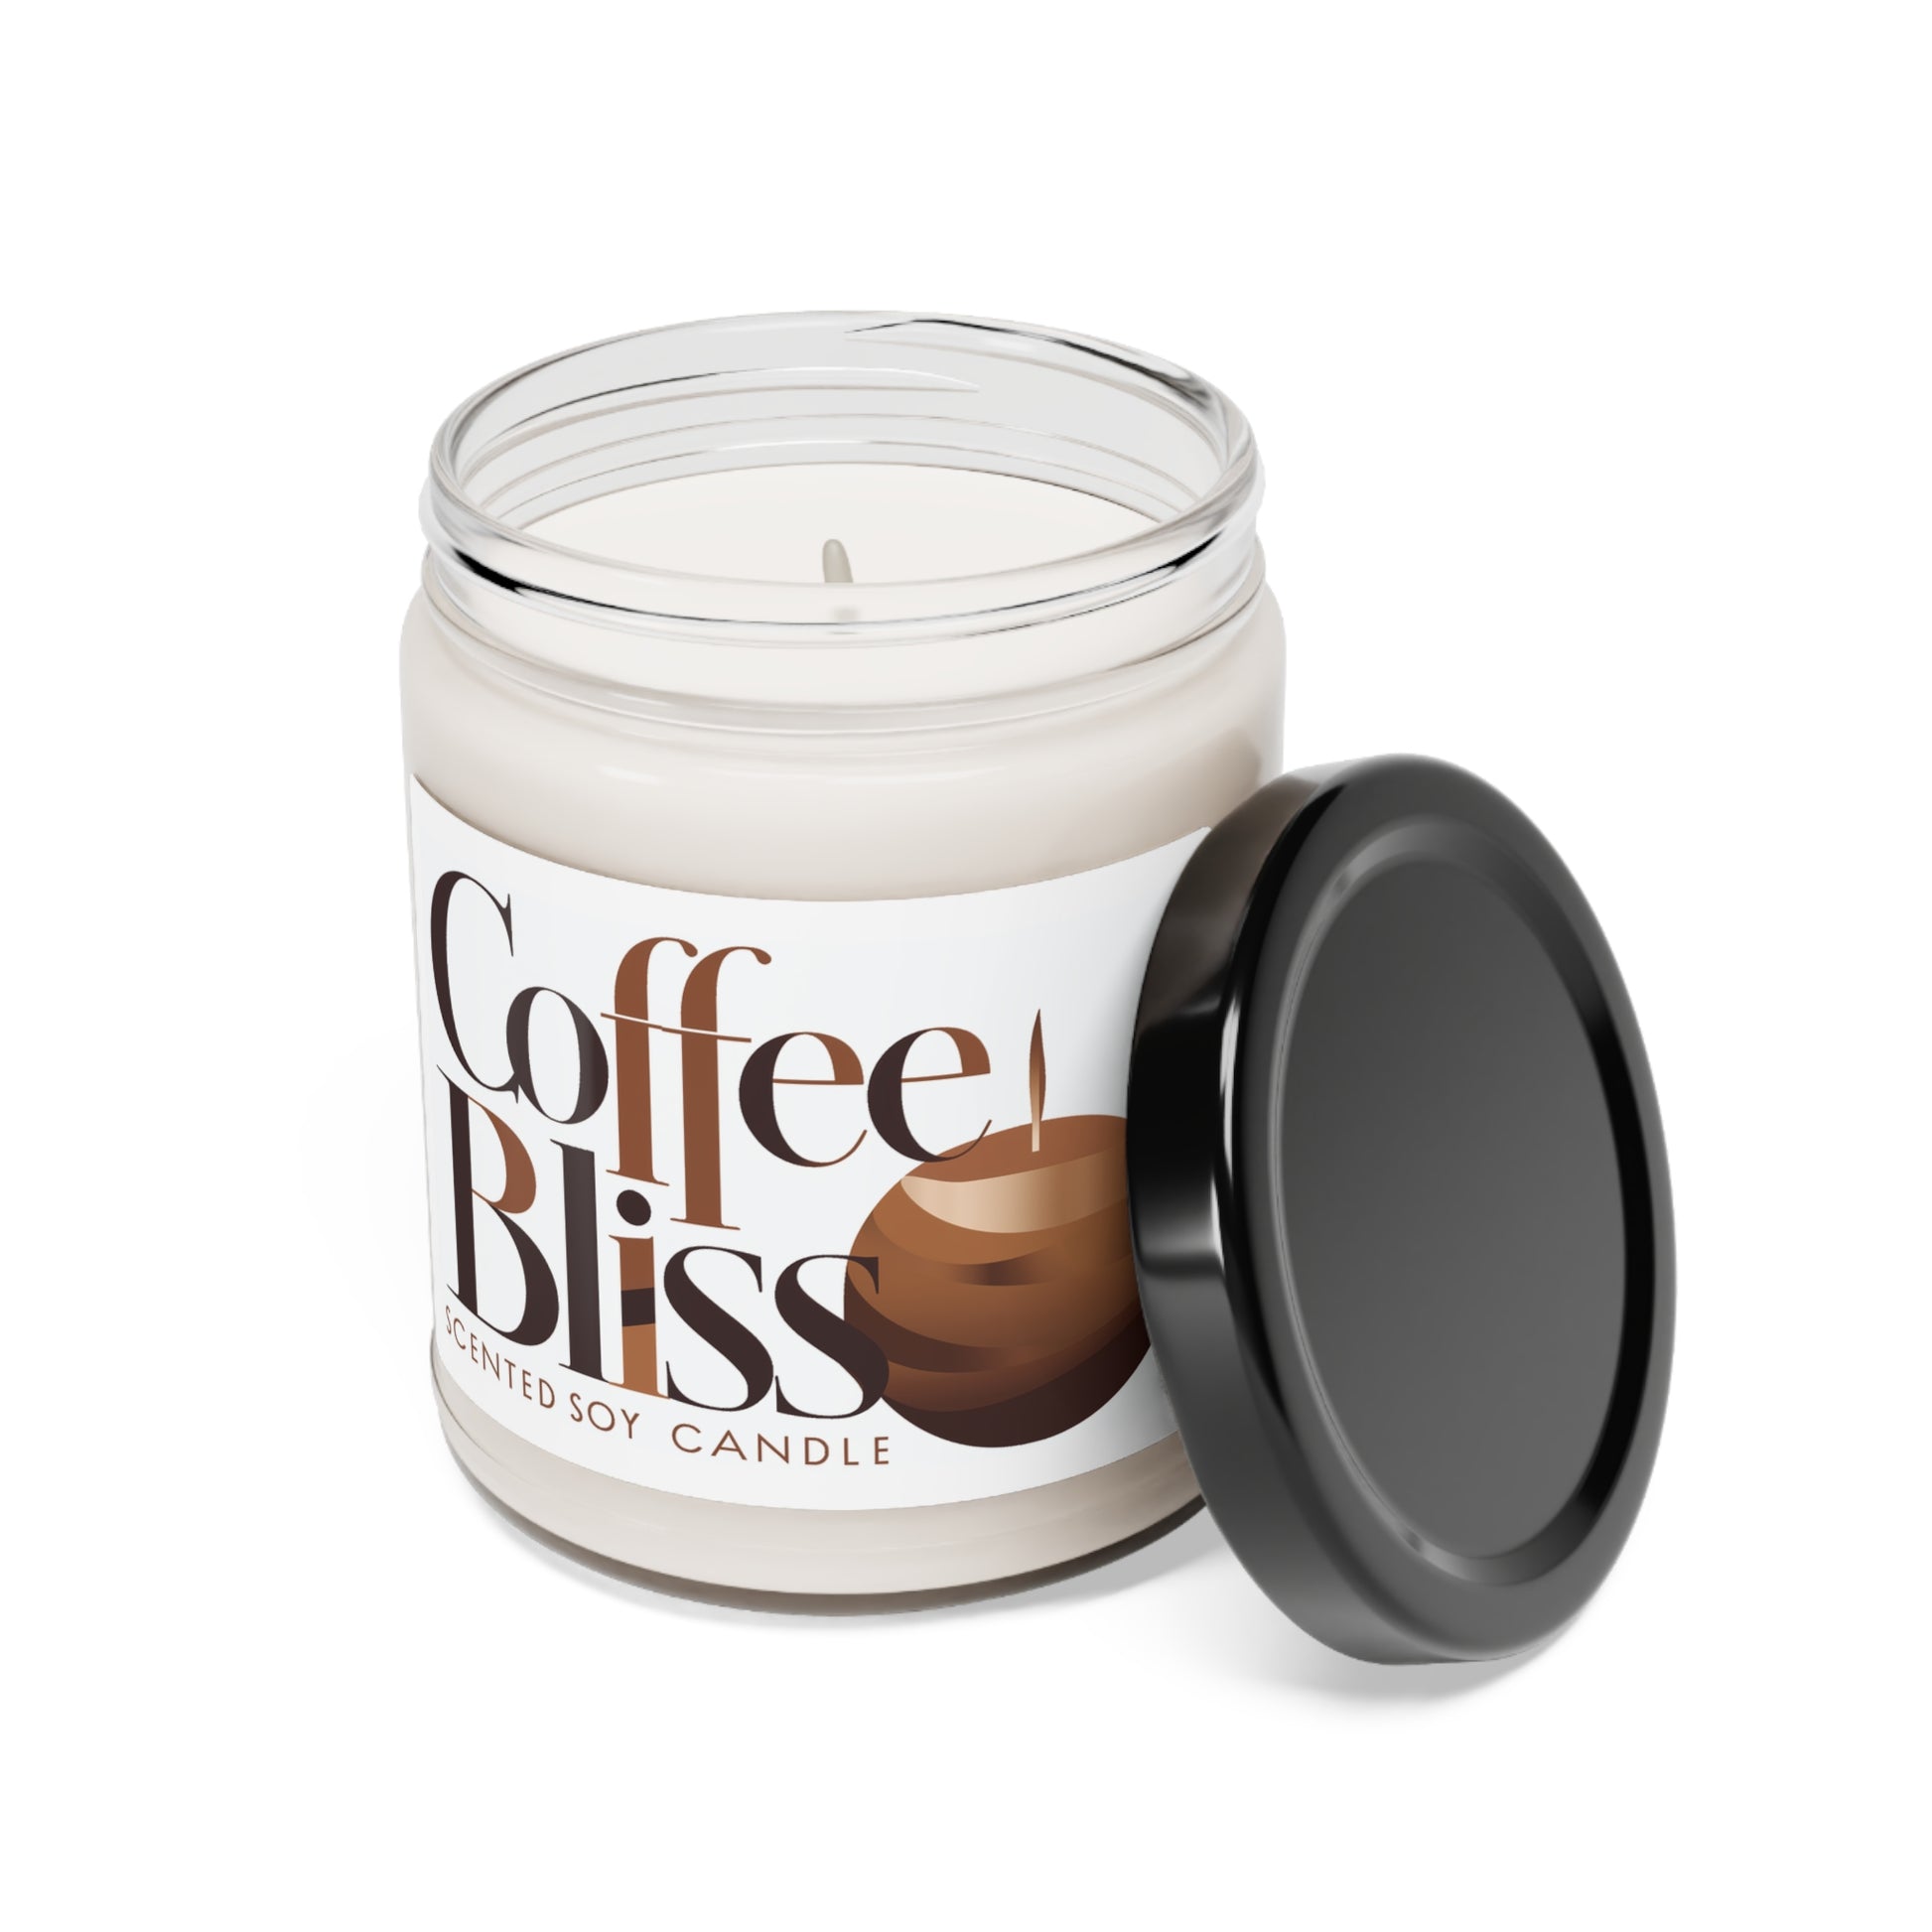 "Coffee Bliss" Scented Soy Candle, 9oz | Coffee Time Classics - Coffee Time Classics